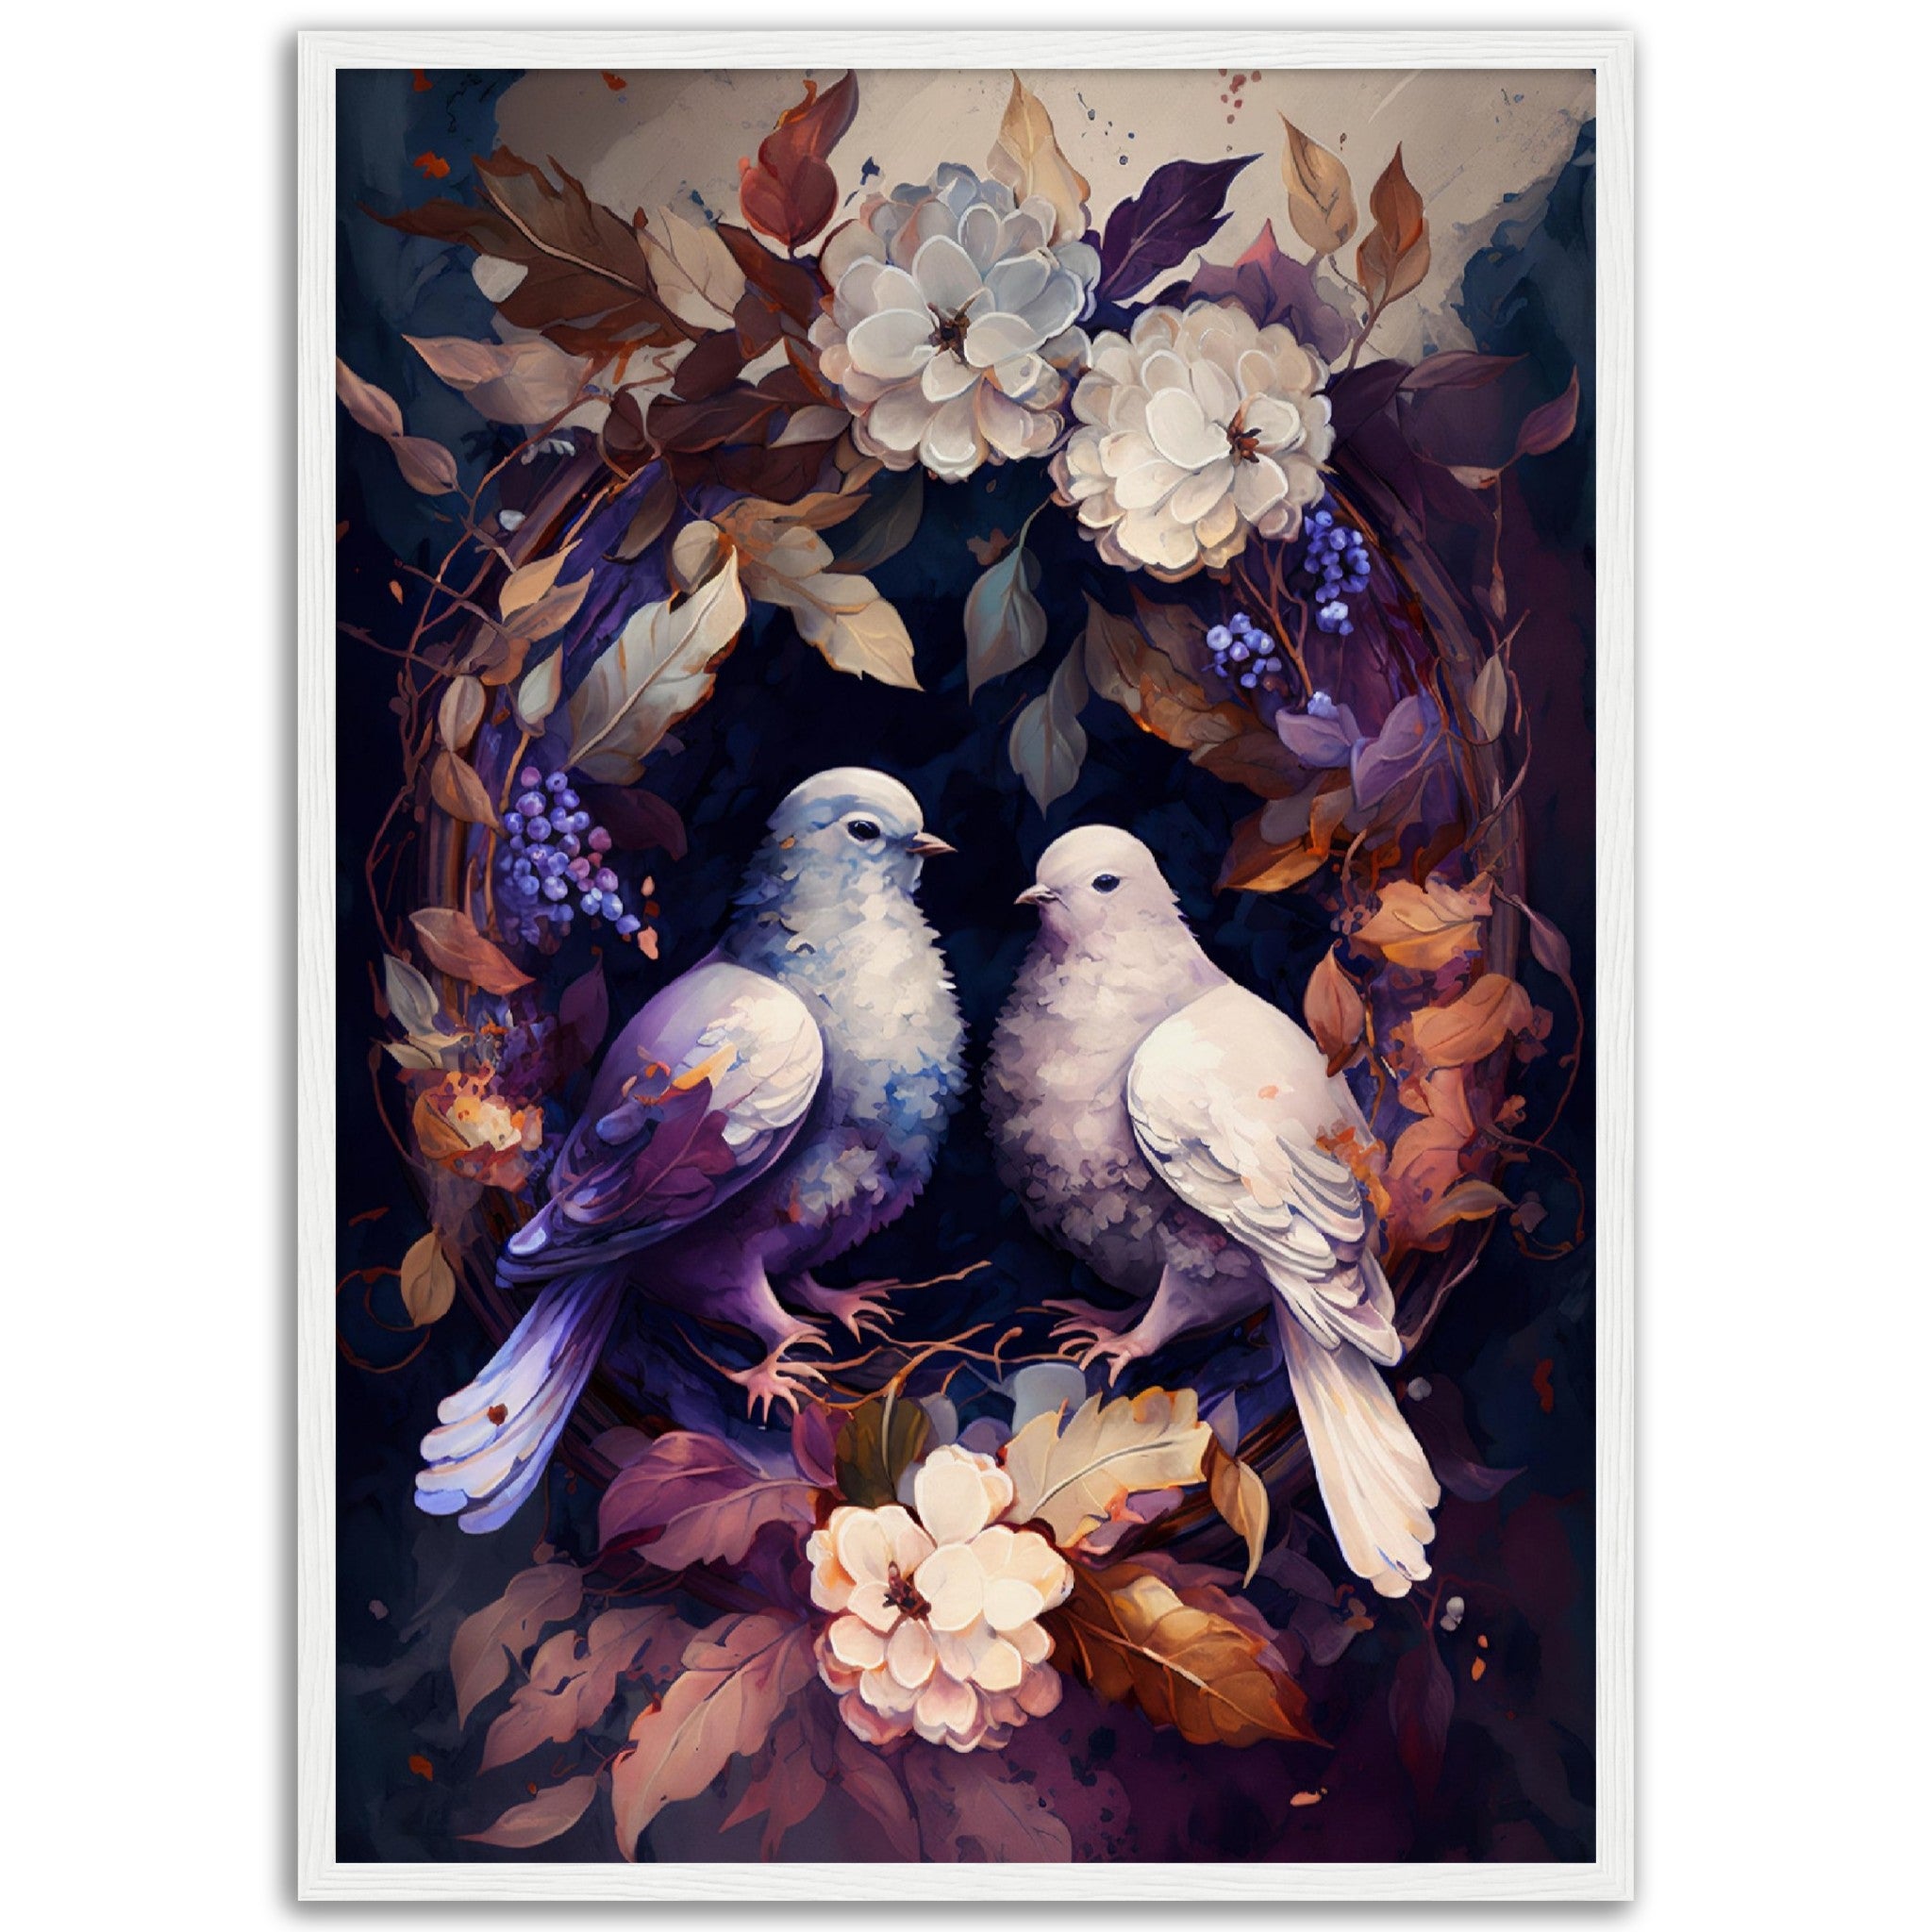 Two Doves Surrounded By Flowers - immersiarts